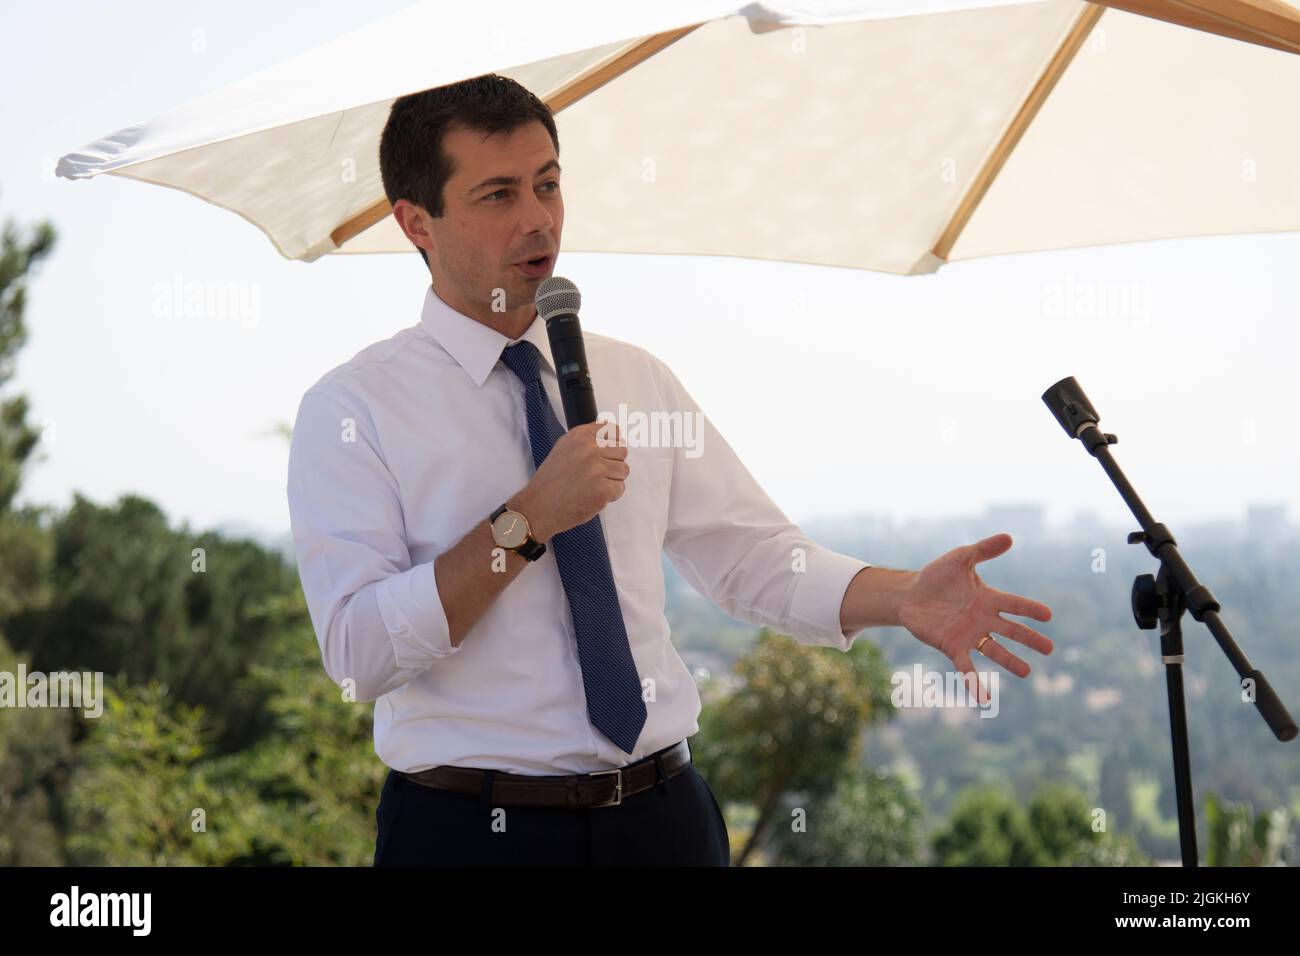 Democratic Presidential Candidate and current United States Secretary of Transportation Pete Buttigieg speaks at an event in California. Stock Photo